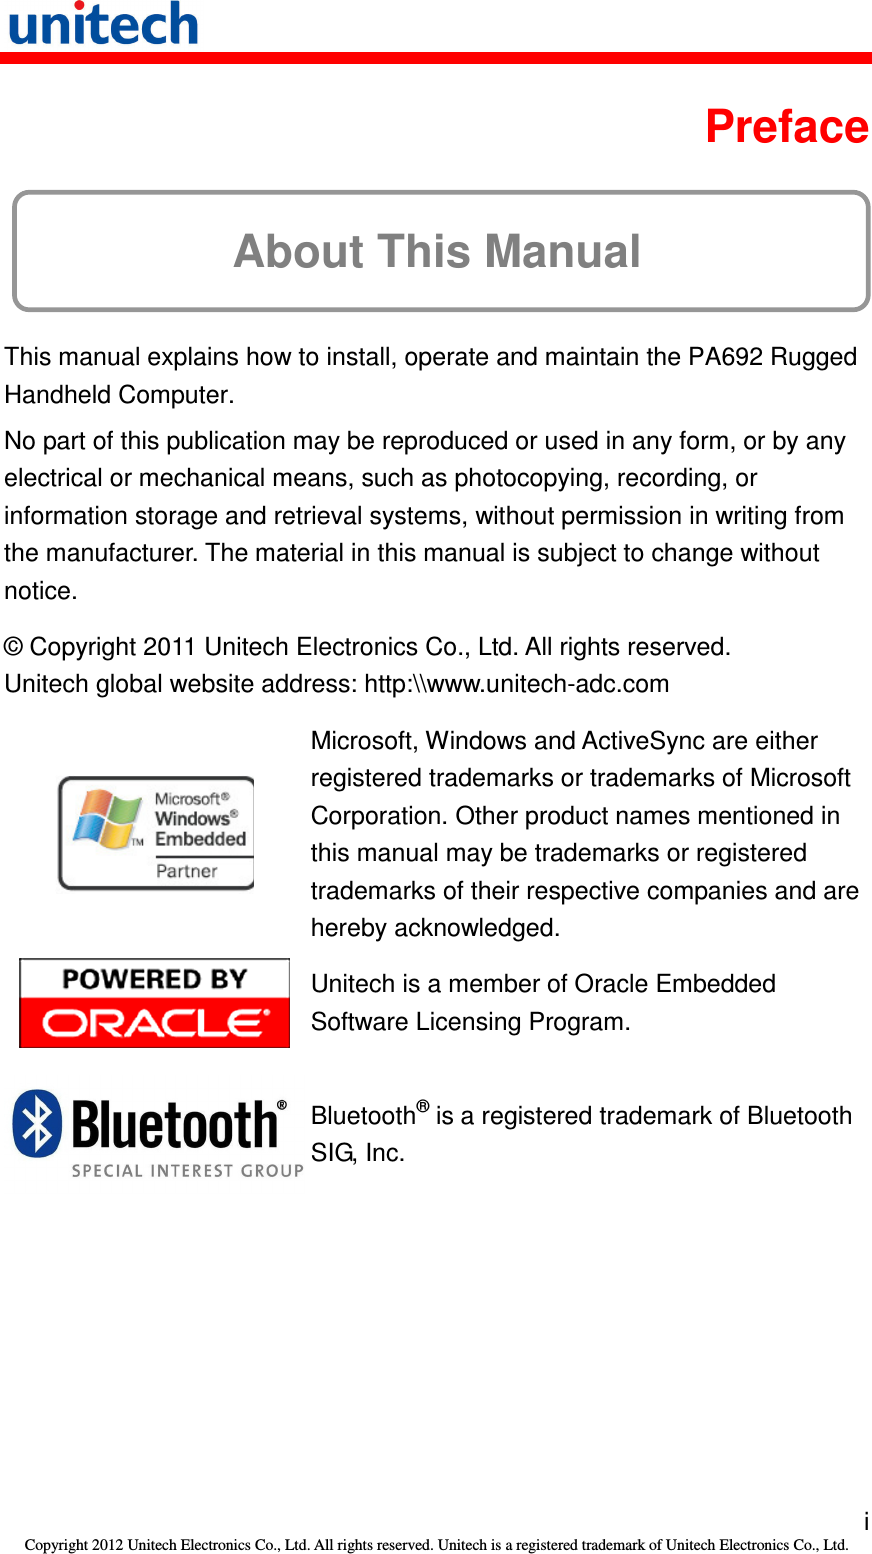   i Copyright 2012 Unitech Electronics Co., Ltd. All rights reserved. Unitech is a registered trademark of Unitech Electronics Co., Ltd.  Preface About This Manual This manual explains how to install, operate and maintain the PA692 Rugged Handheld Computer. No part of this publication may be reproduced or used in any form, or by any electrical or mechanical means, such as photocopying, recording, or information storage and retrieval systems, without permission in writing from the manufacturer. The material in this manual is subject to change without notice. © Copyright 2011 Unitech Electronics Co., Ltd. All rights reserved. Unitech global website address: http:\\www.unitech-adc.com  Microsoft, Windows and ActiveSync are either registered trademarks or trademarks of Microsoft Corporation. Other product names mentioned in this manual may be trademarks or registered trademarks of their respective companies and are hereby acknowledged.  Unitech is a member of Oracle Embedded Software Licensing Program.  Bluetooth® is a registered trademark of Bluetooth SIG, Inc. 